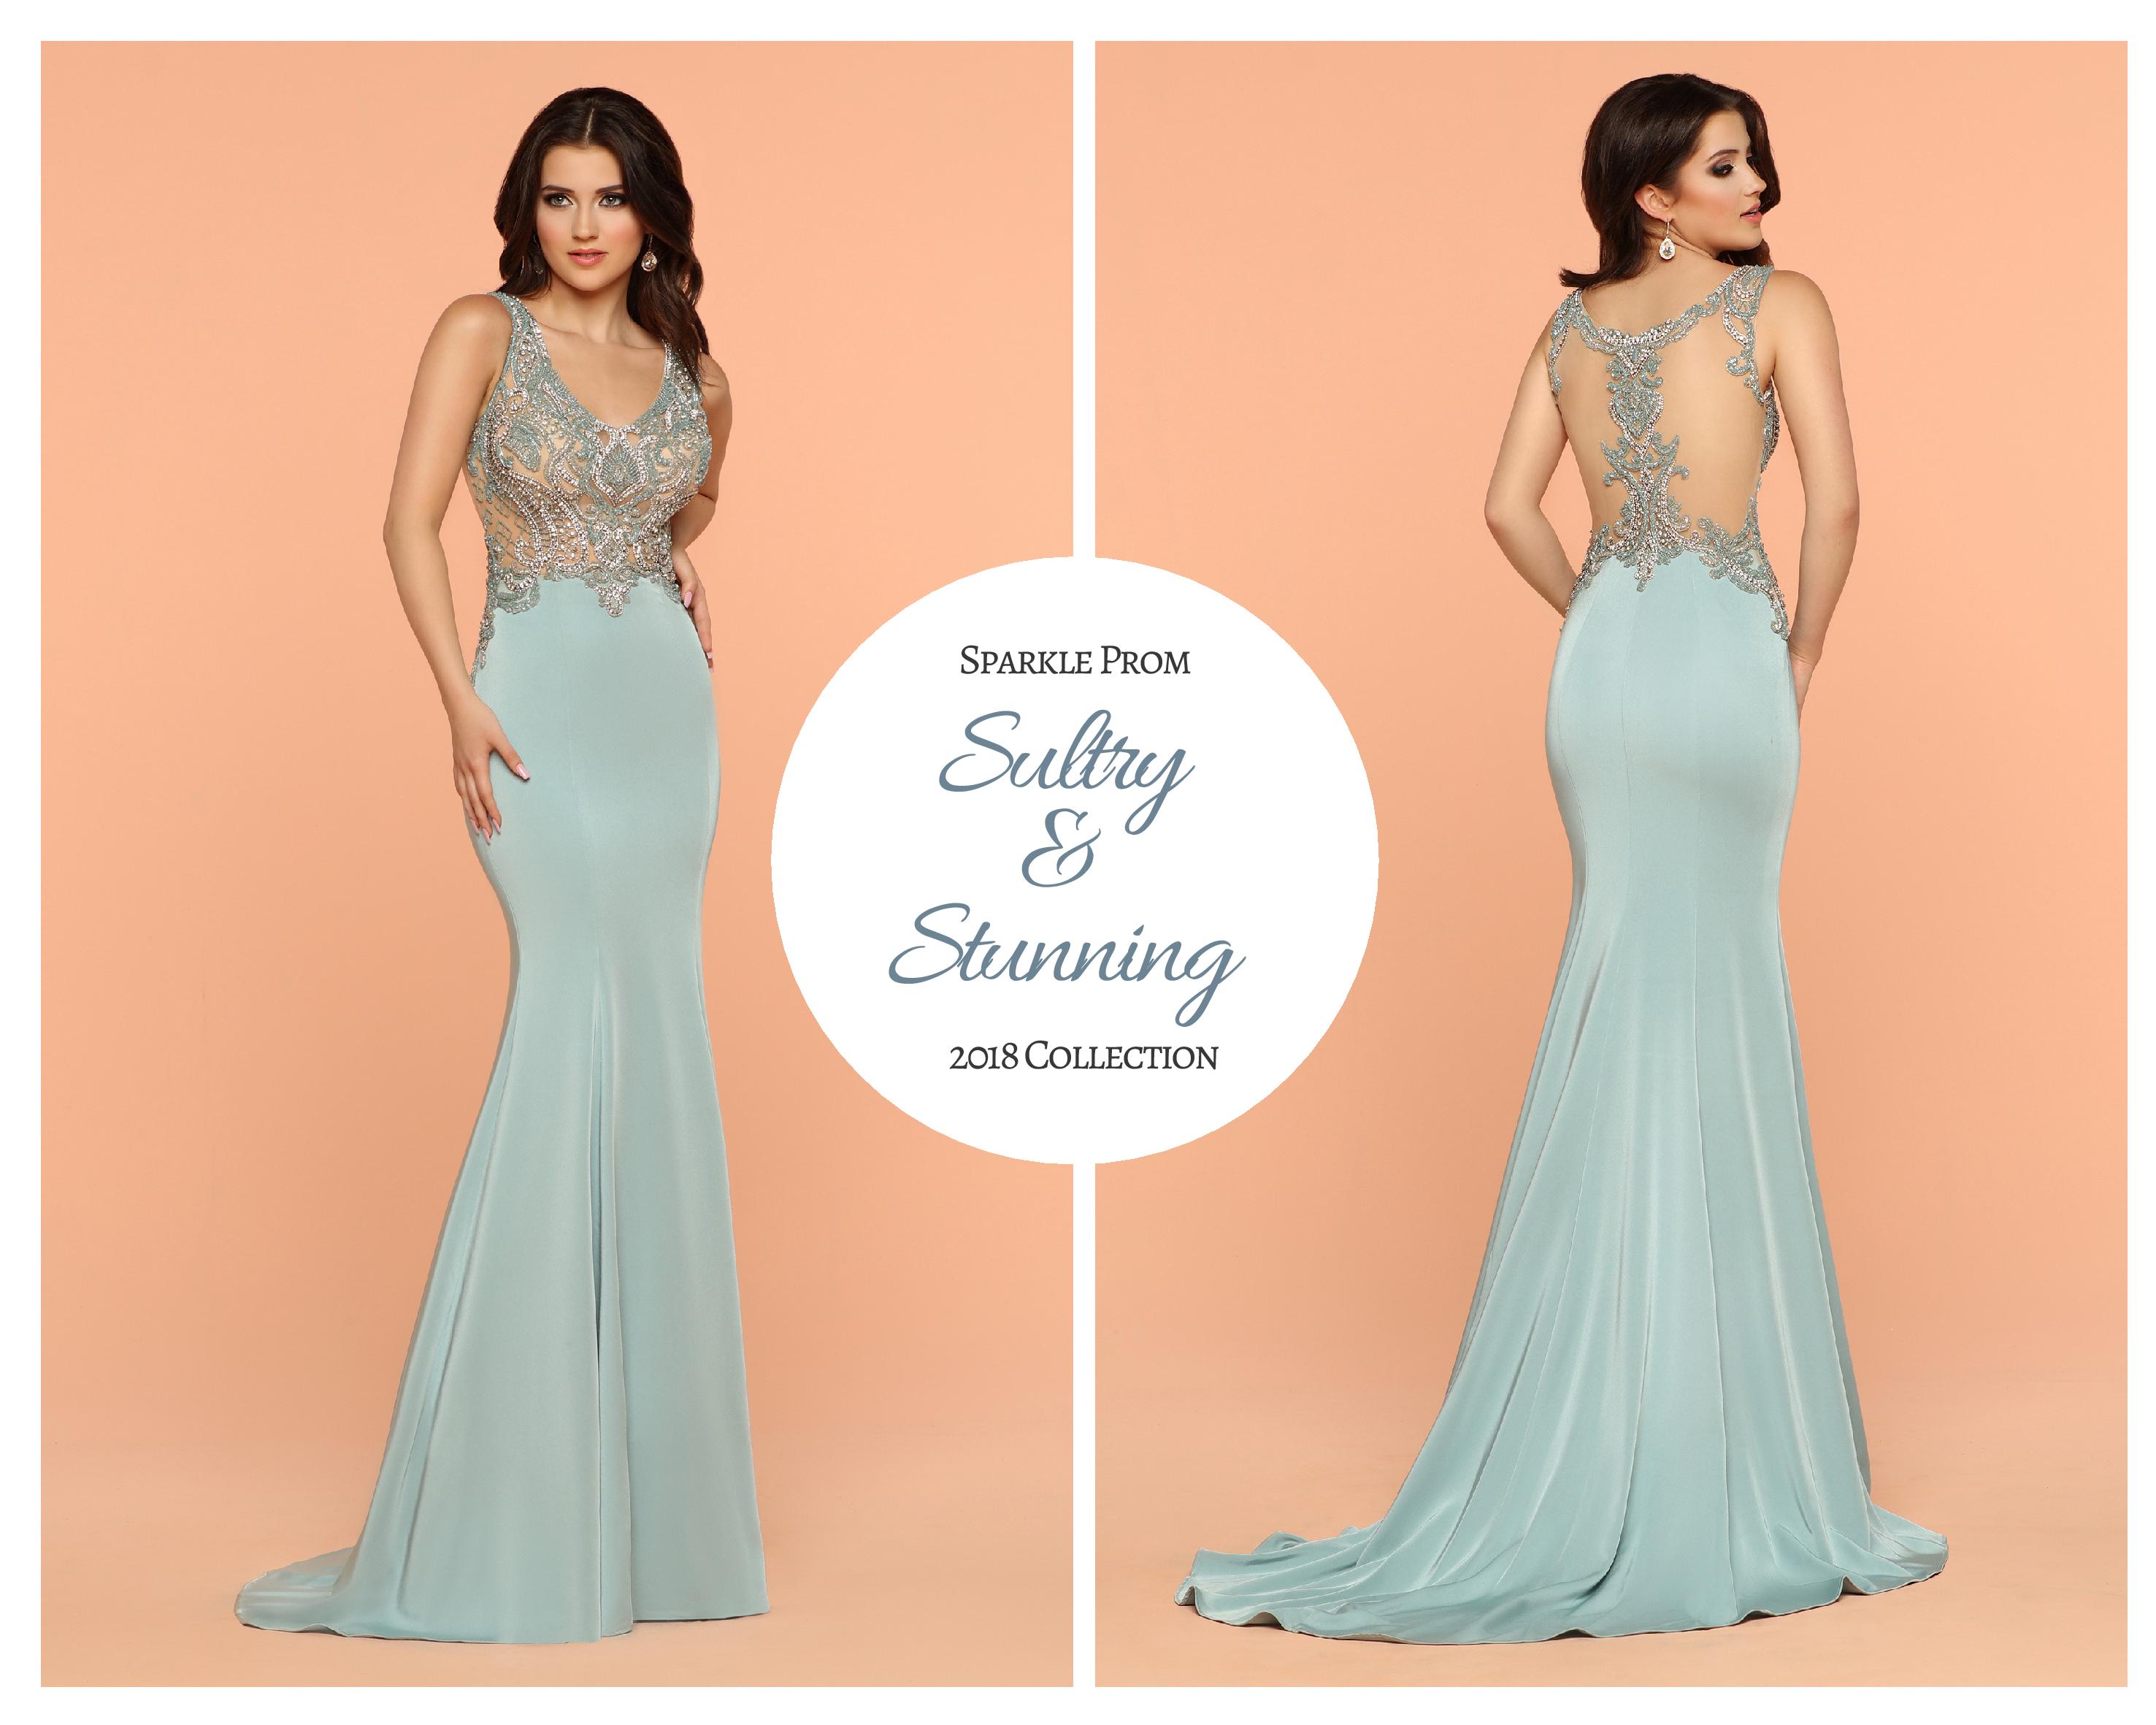 Sultry & Stunning: Jersey & Crepe Gowns for Prom 2018 – Sparkle Prom 2018 Collection